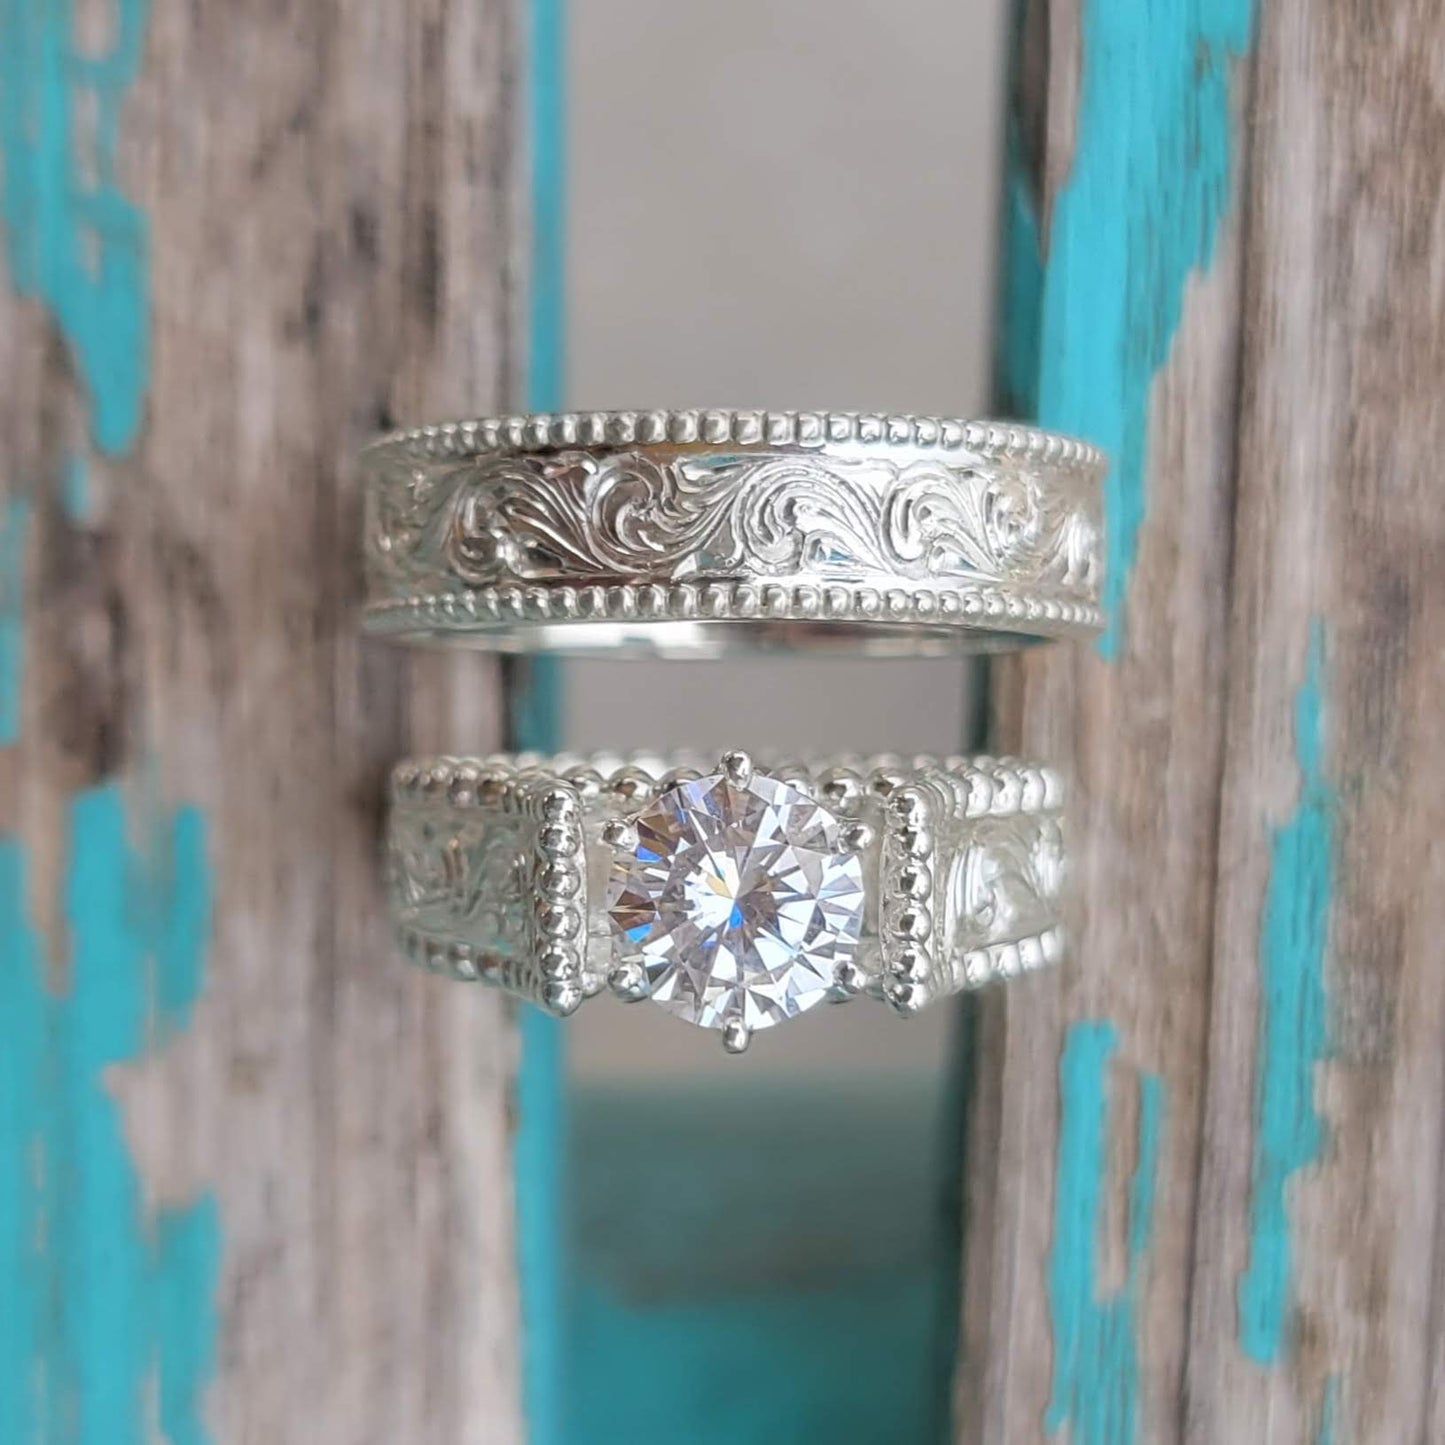 Pin by Meghan Boone on Ring-a-Bling! | Western wedding rings, Jewelry, Western  rings